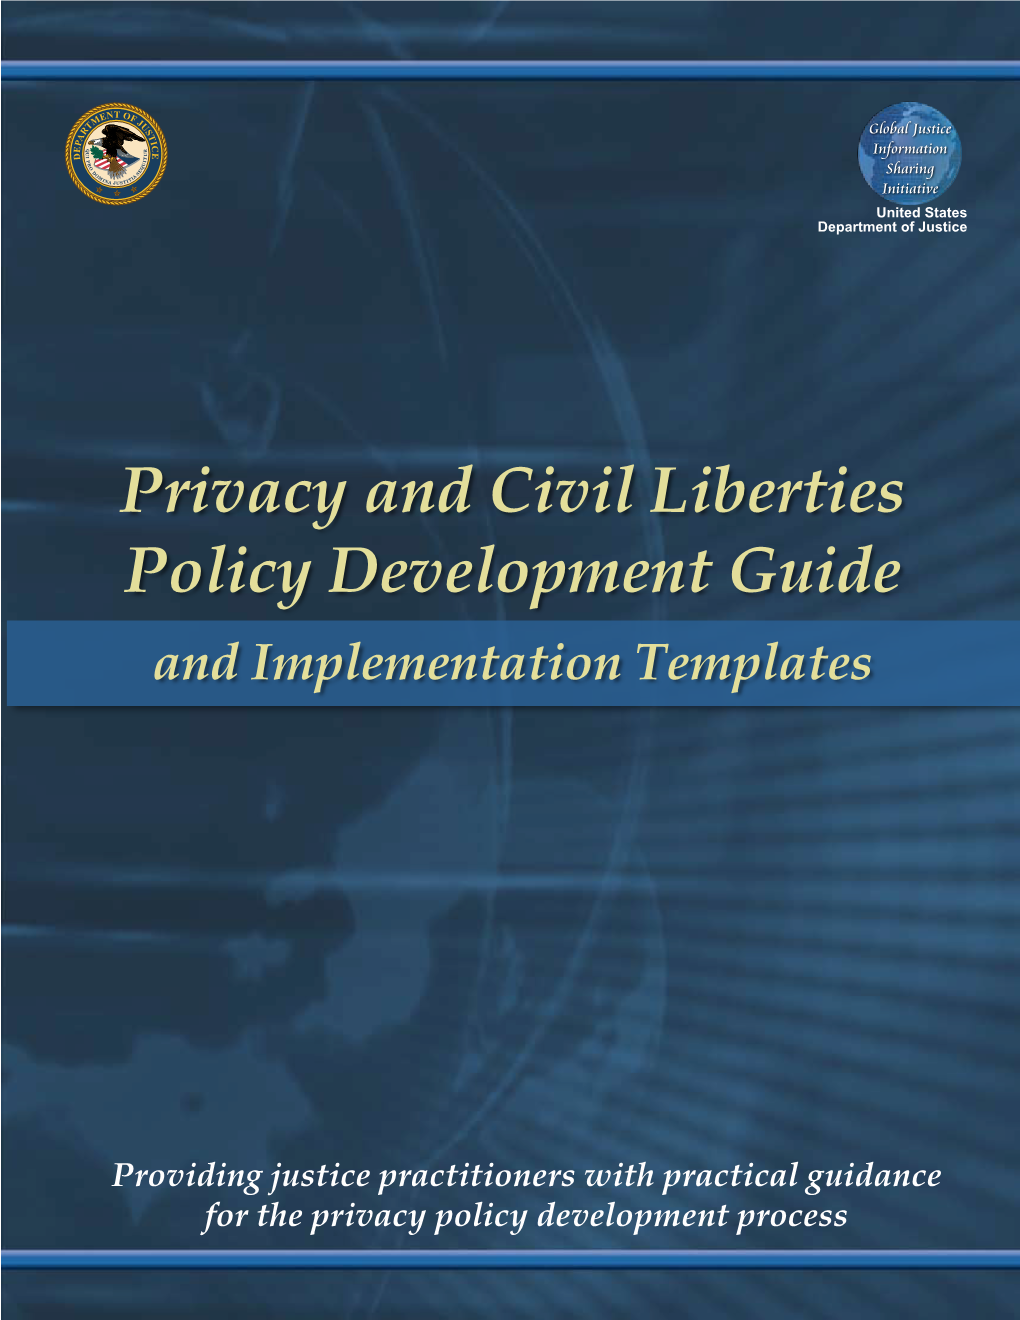 Privacy and Civil Liberties Policy Development Guide and Implementation Templates